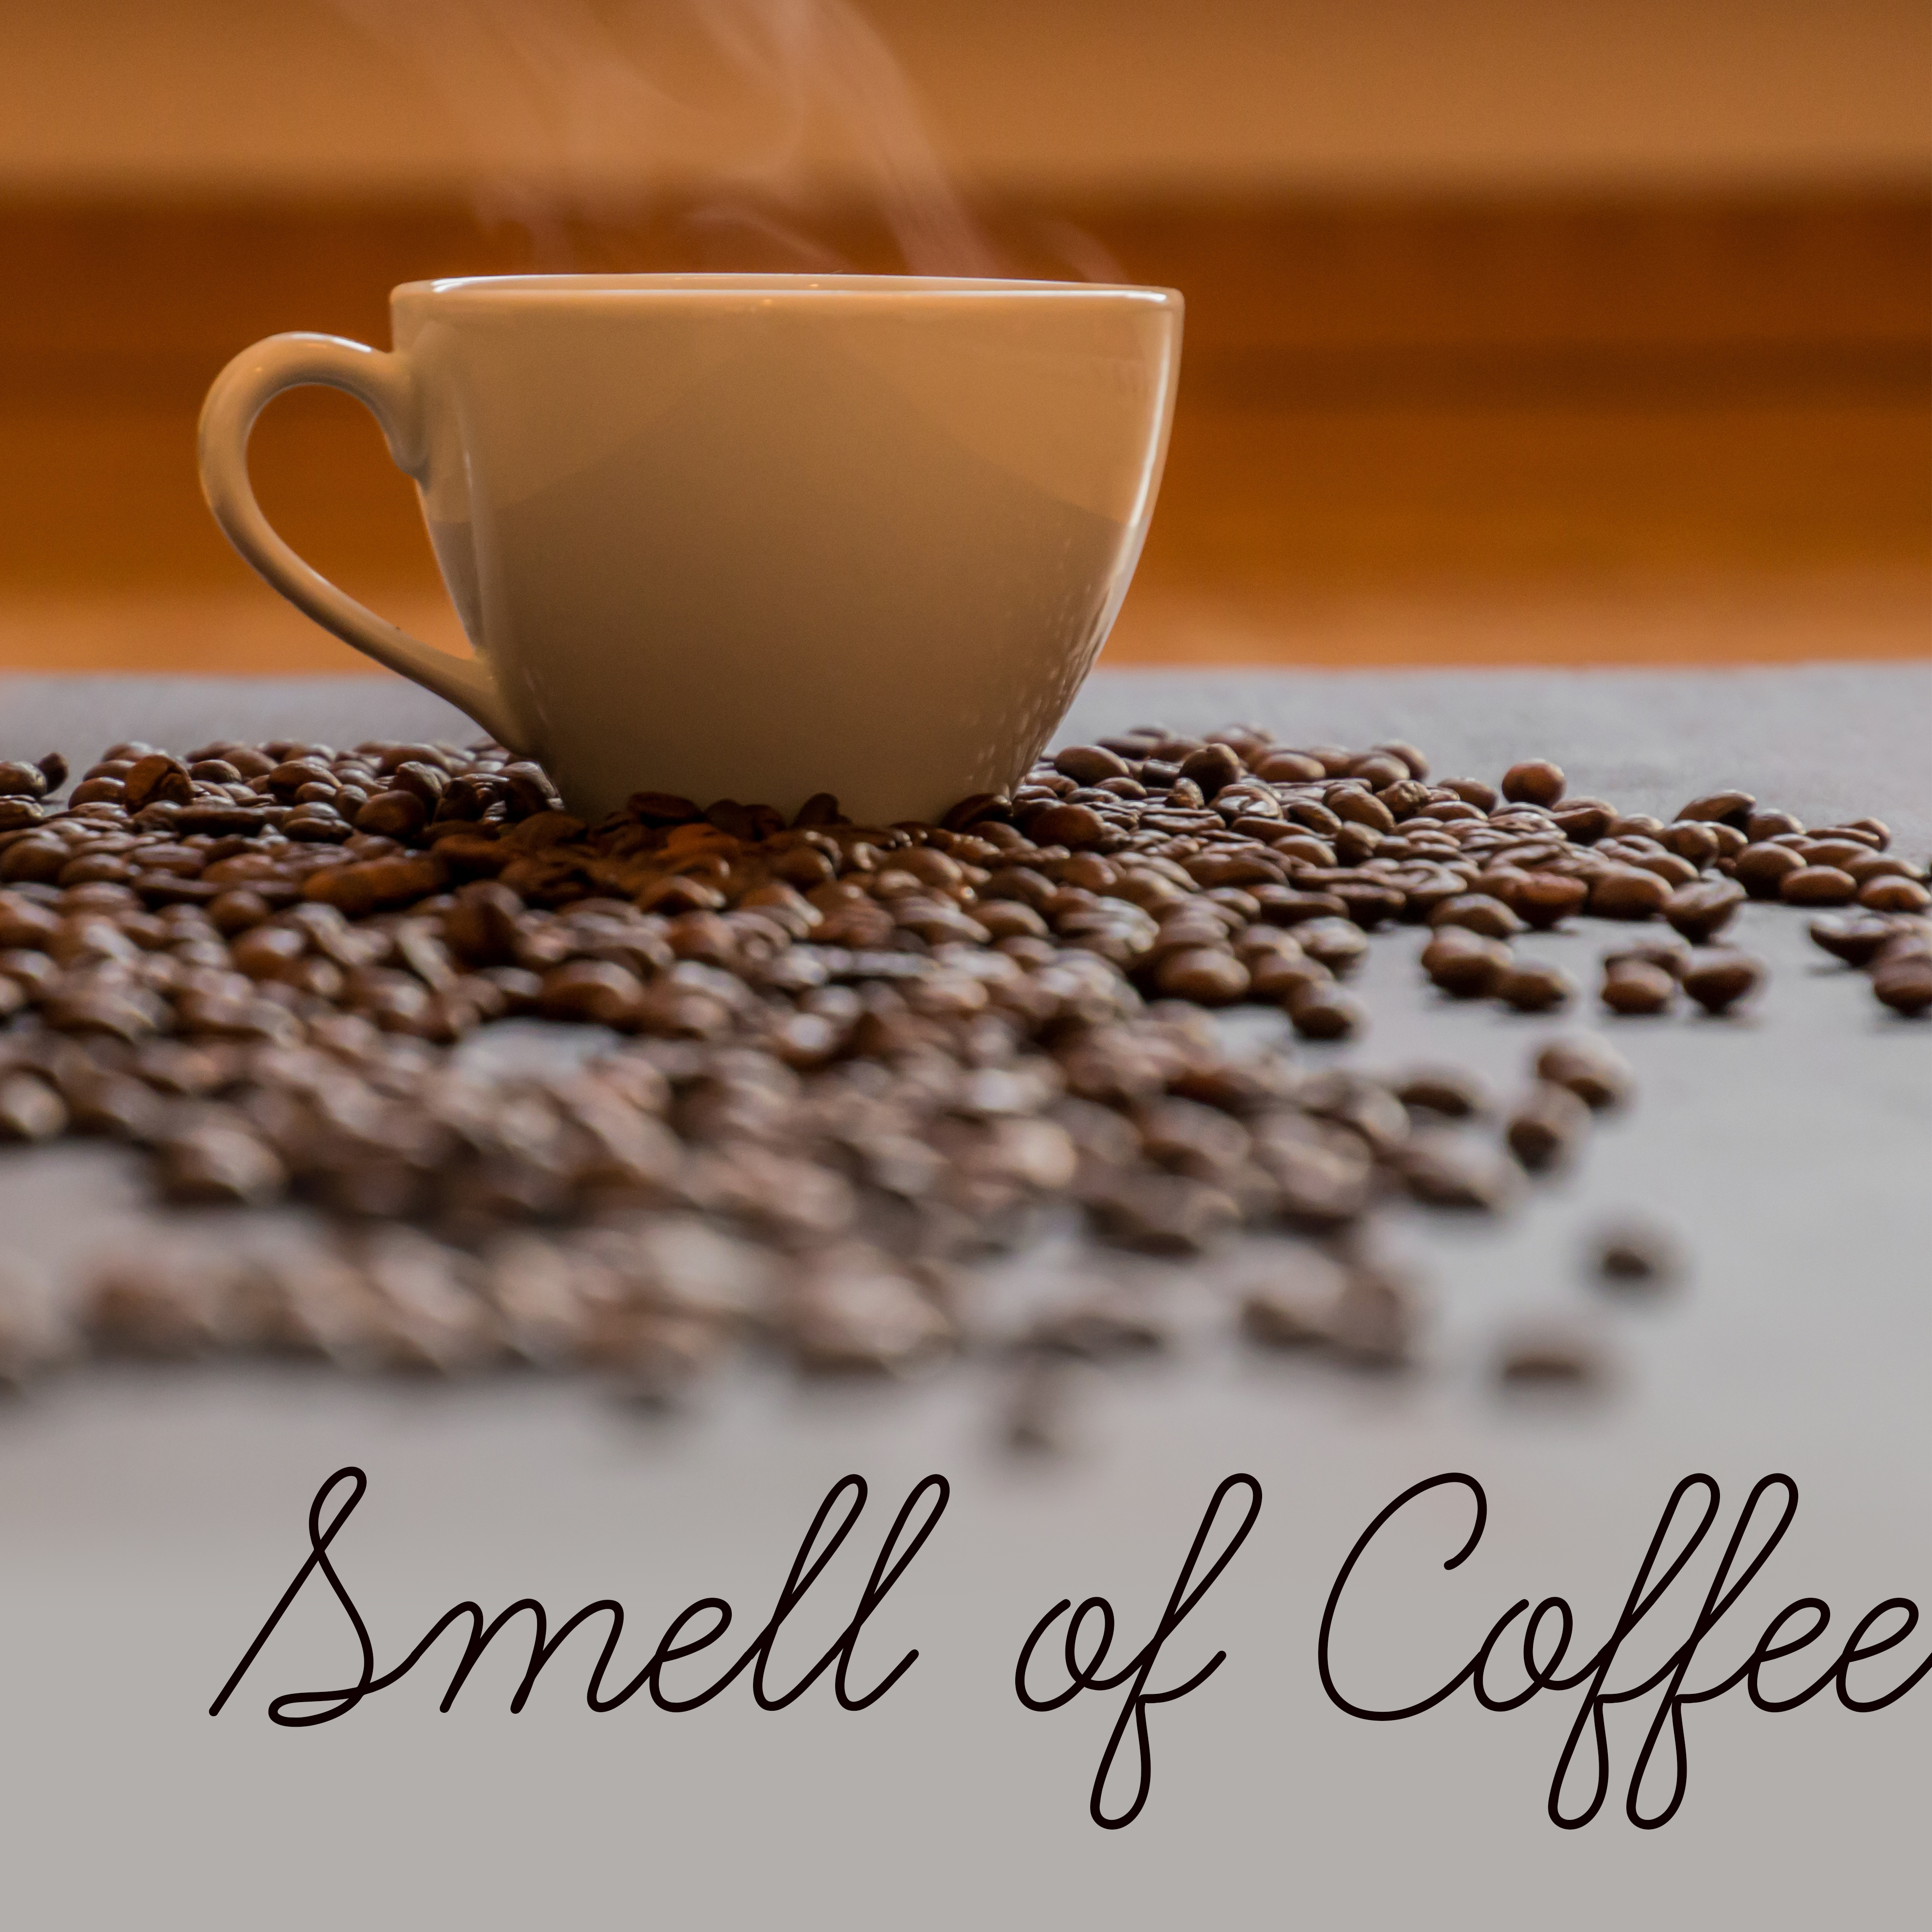 Smell of Coffee – Best Smooth Jazz Music for Relaxation, Jazz Cafe, Gentle Piano, Restaurant Sounds, Cafe Background Music, Rest with Family